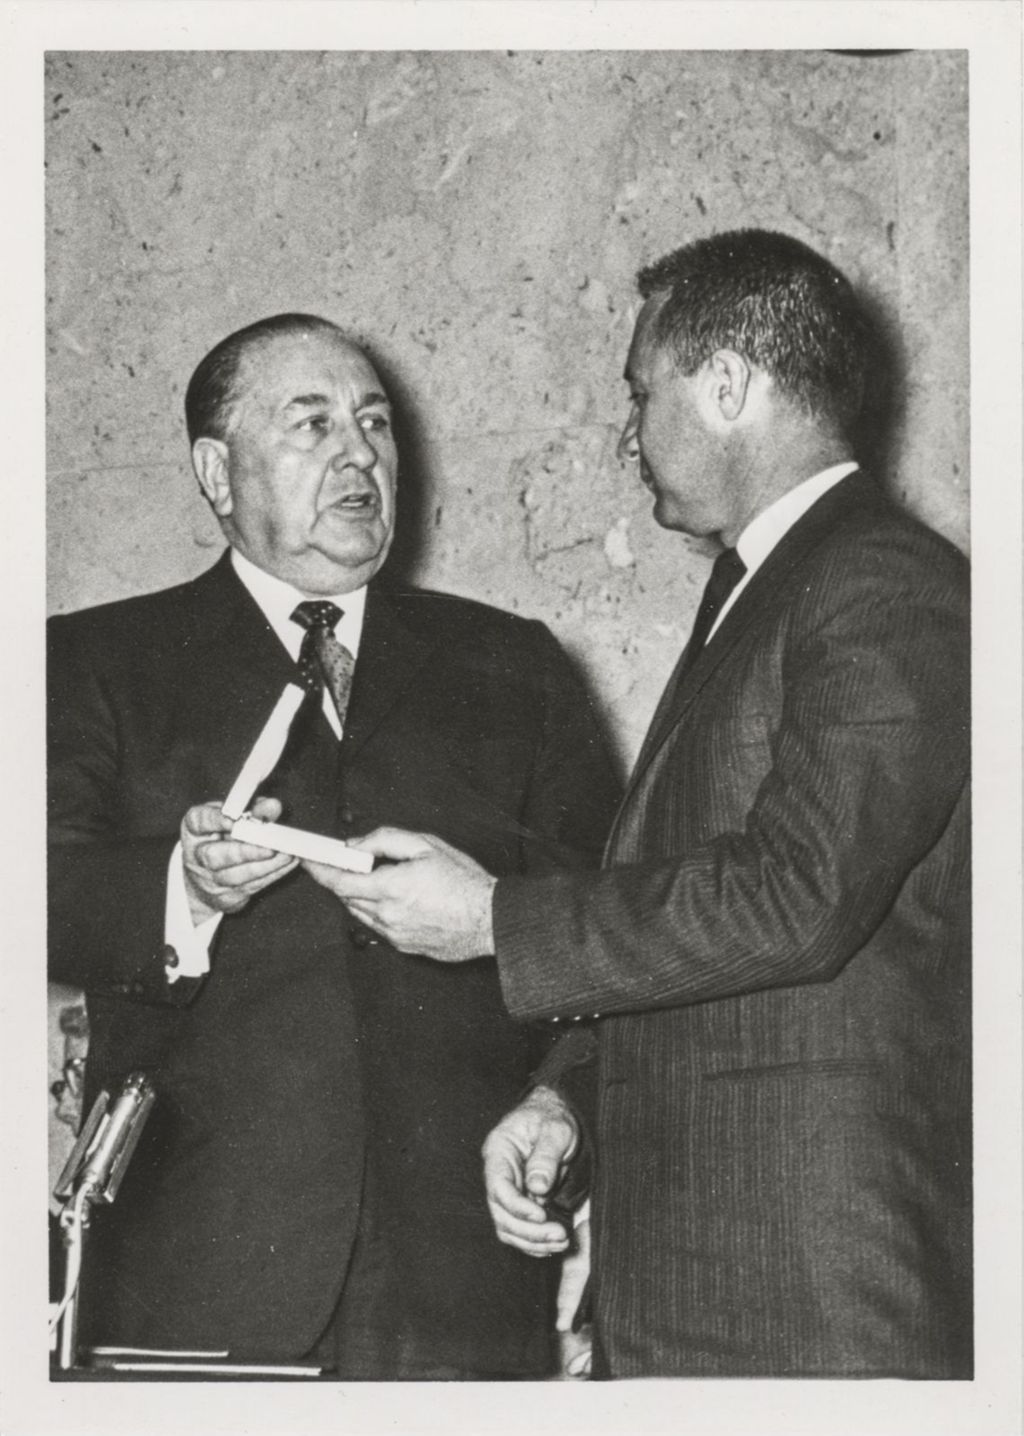 Astronaut Gus Grissom accepts an award from Richard J. Daley